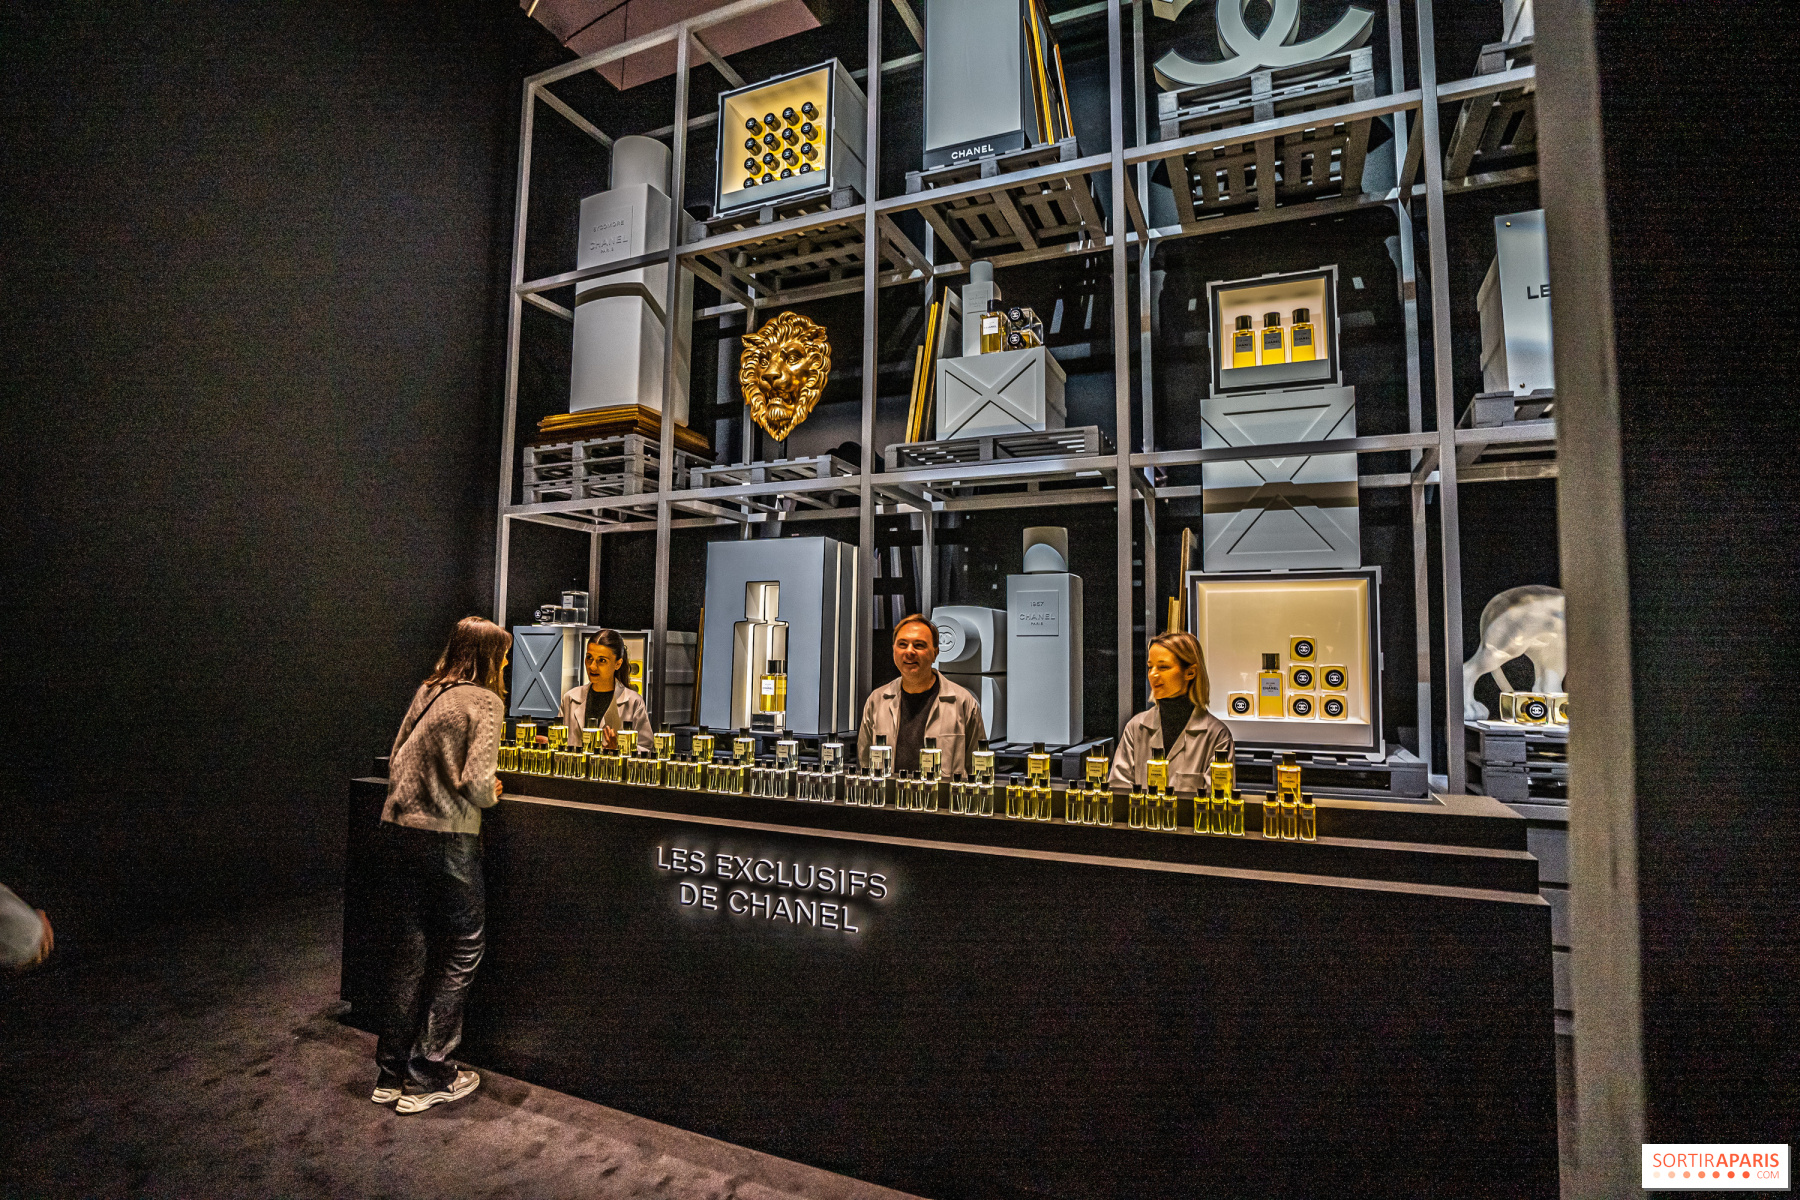 Le Grand Numéro de Chanel: the free and immersive exhibition at